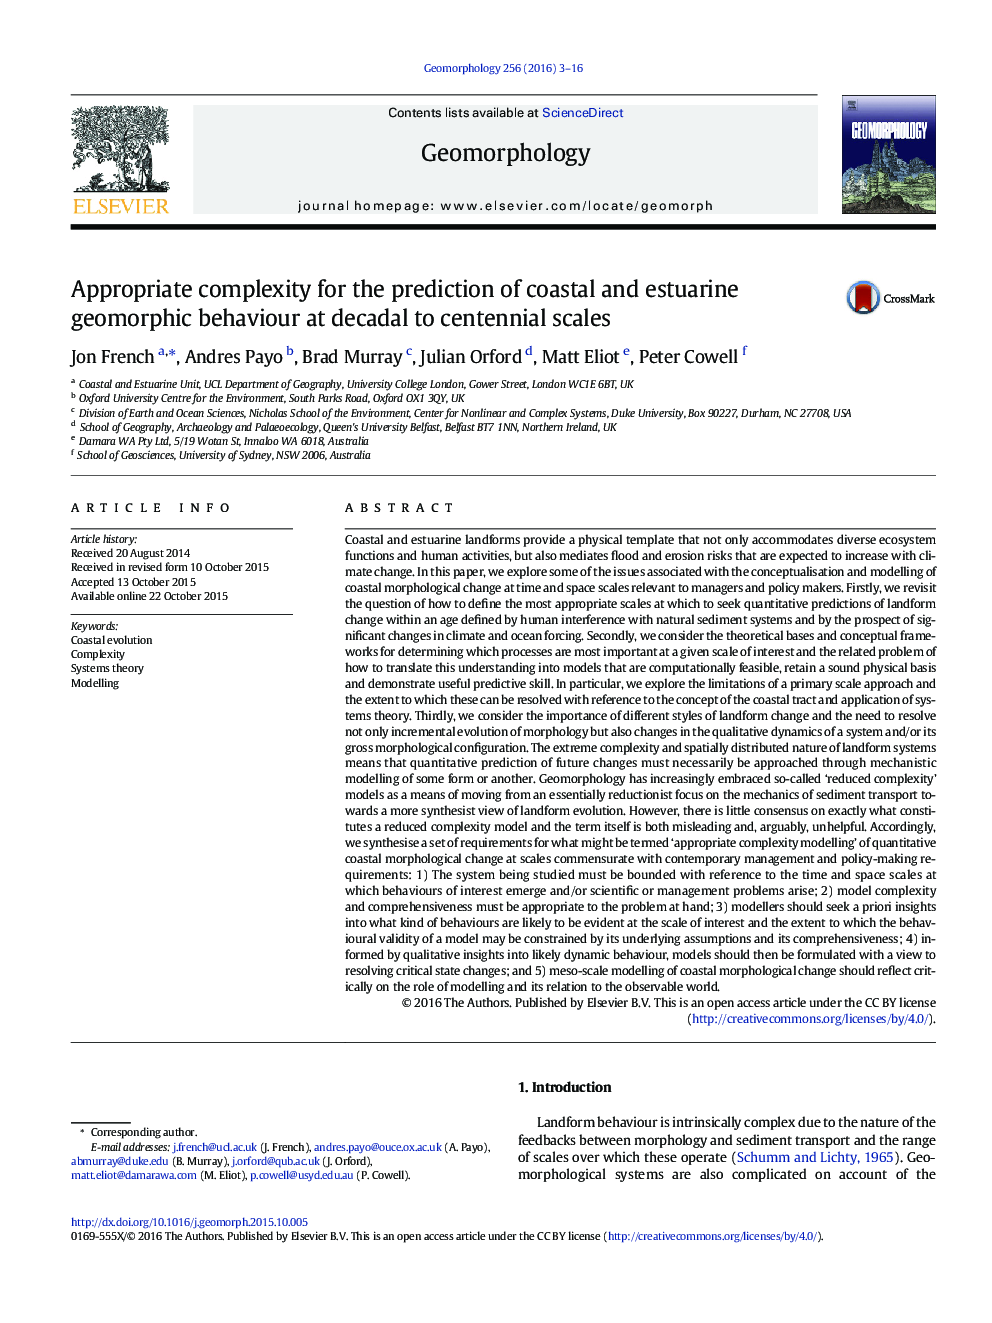 Appropriate complexity for the prediction of coastal and estuarine geomorphic behaviour at decadal to centennial scales